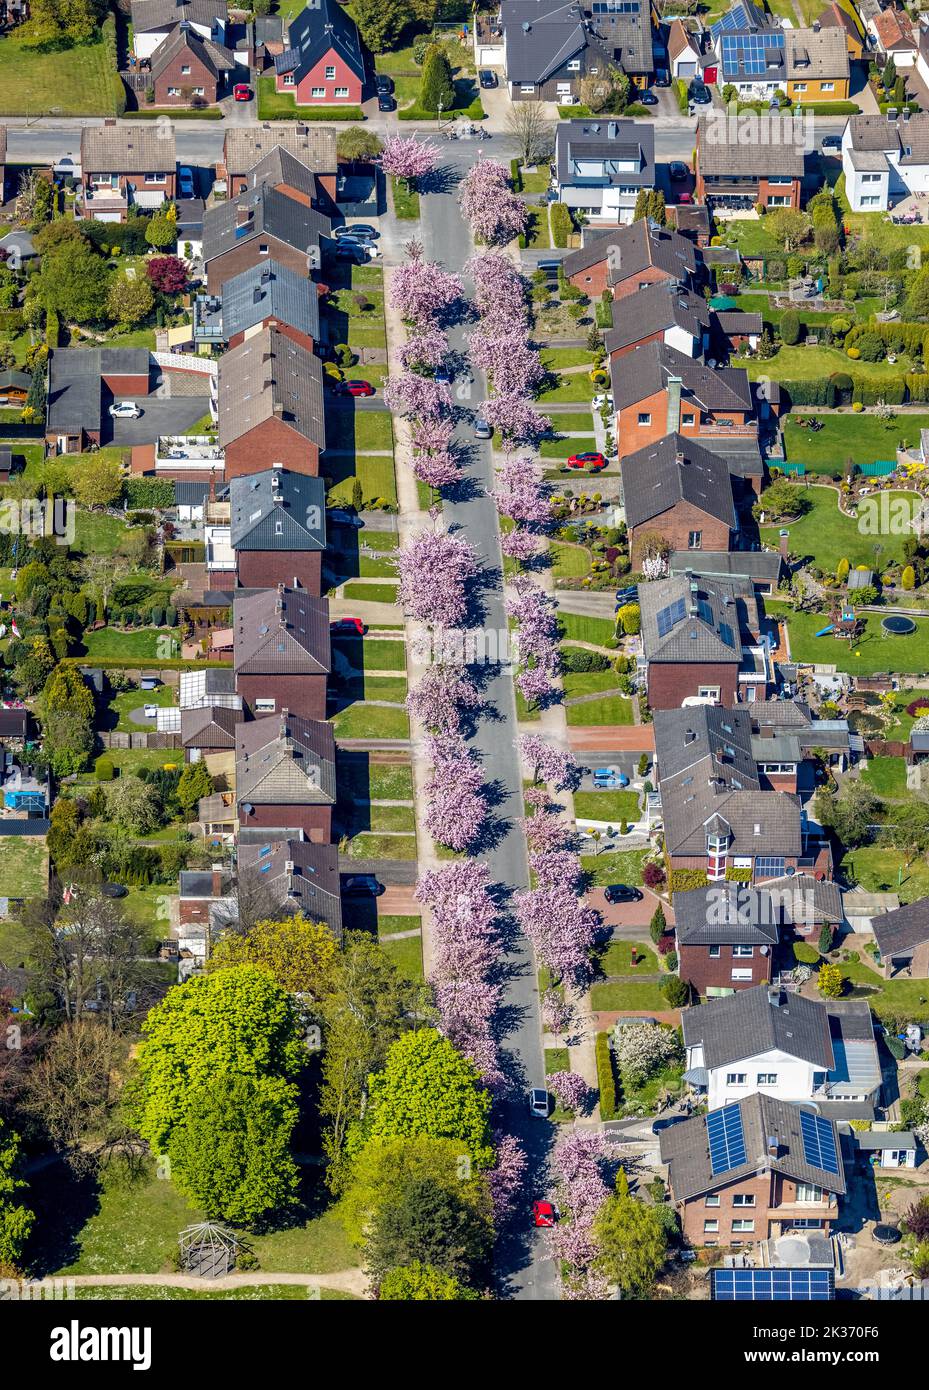 Aerial view, At the moment the most beautiful street in Hamm: Aerial view of Carl-Goerdeler-Straße in Bockum-Hövel with the blossoming cherry trees, H Stock Photo